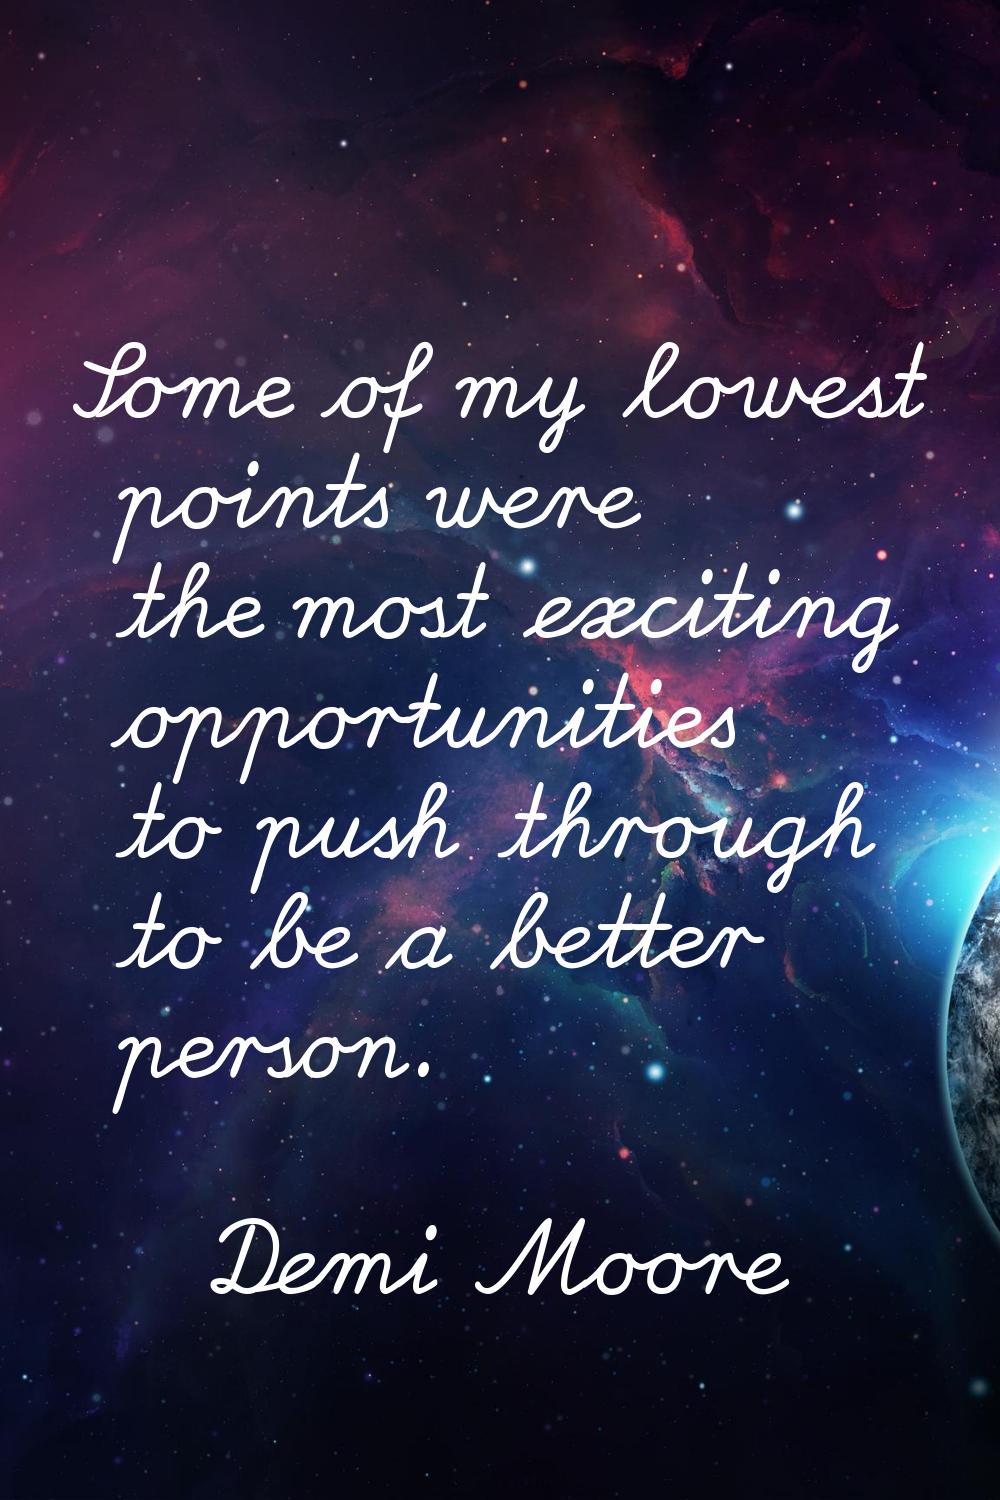 Some of my lowest points were the most exciting opportunities to push through to be a better person